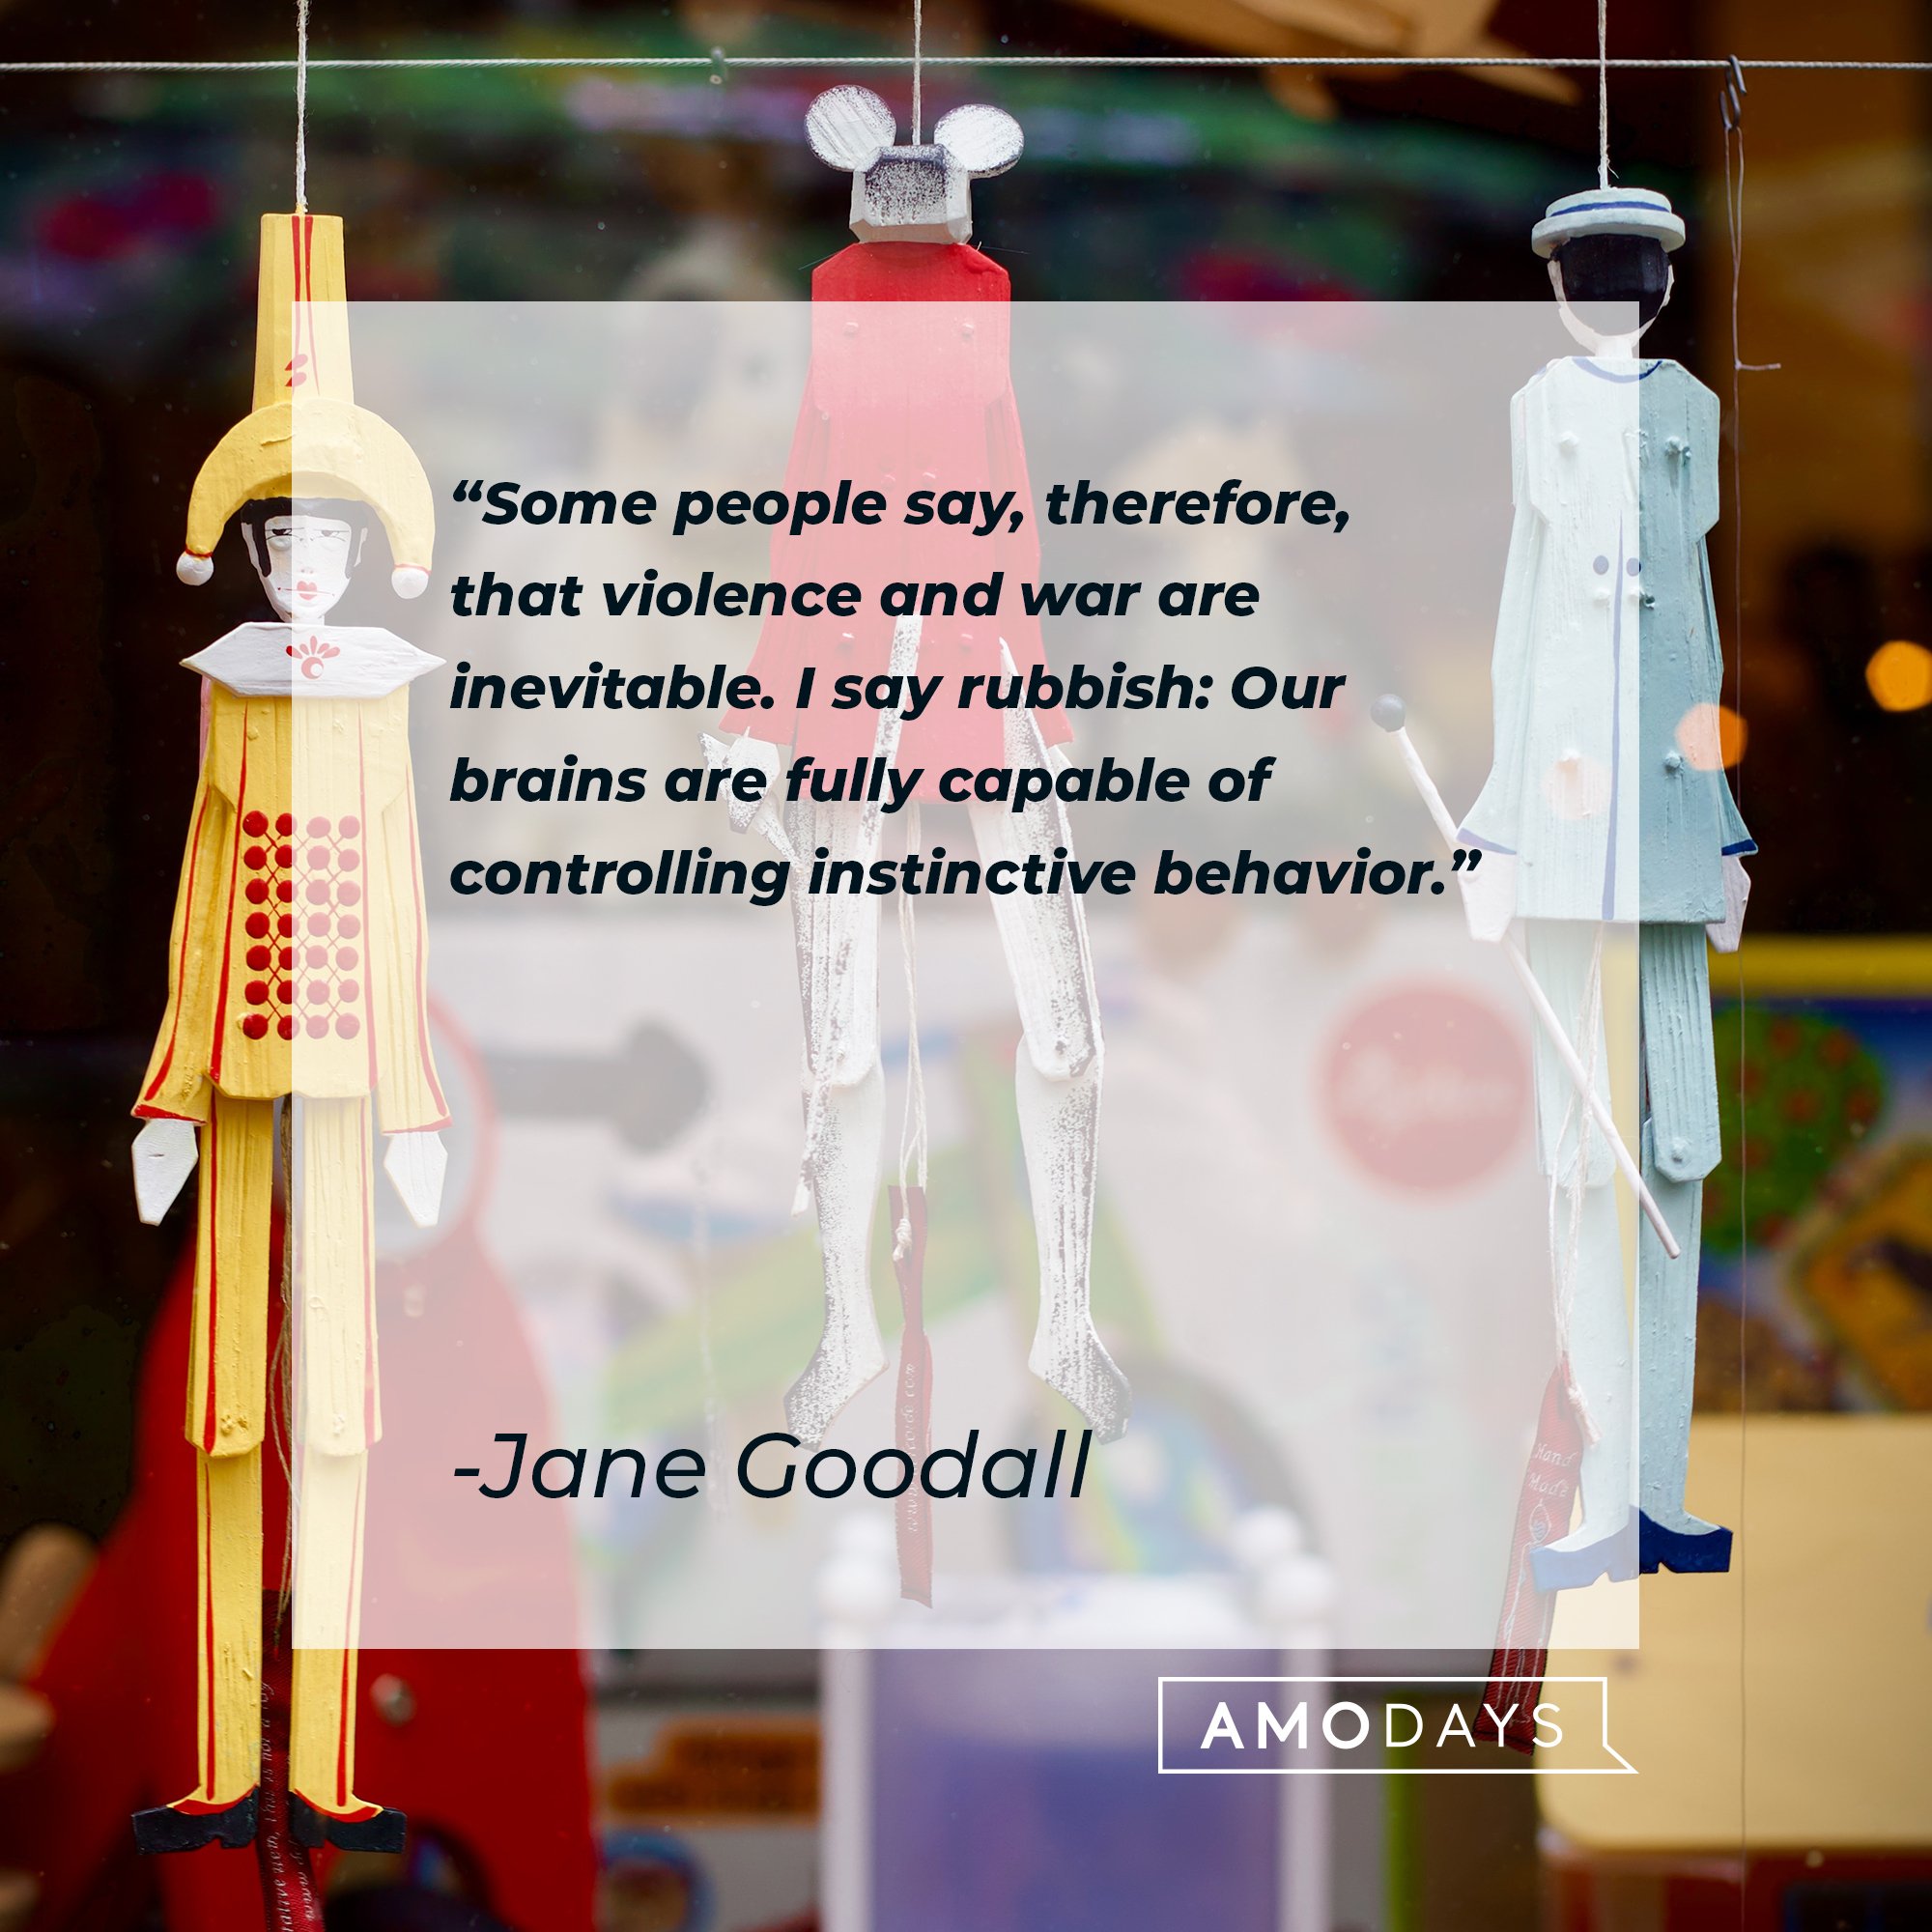 Jane Goodall's quote: "Some people say, therefore, that violence and war are inevitable. I say rubbish: Our brains are fully capable of controlling instinctive behavior." | Image: AmoDays